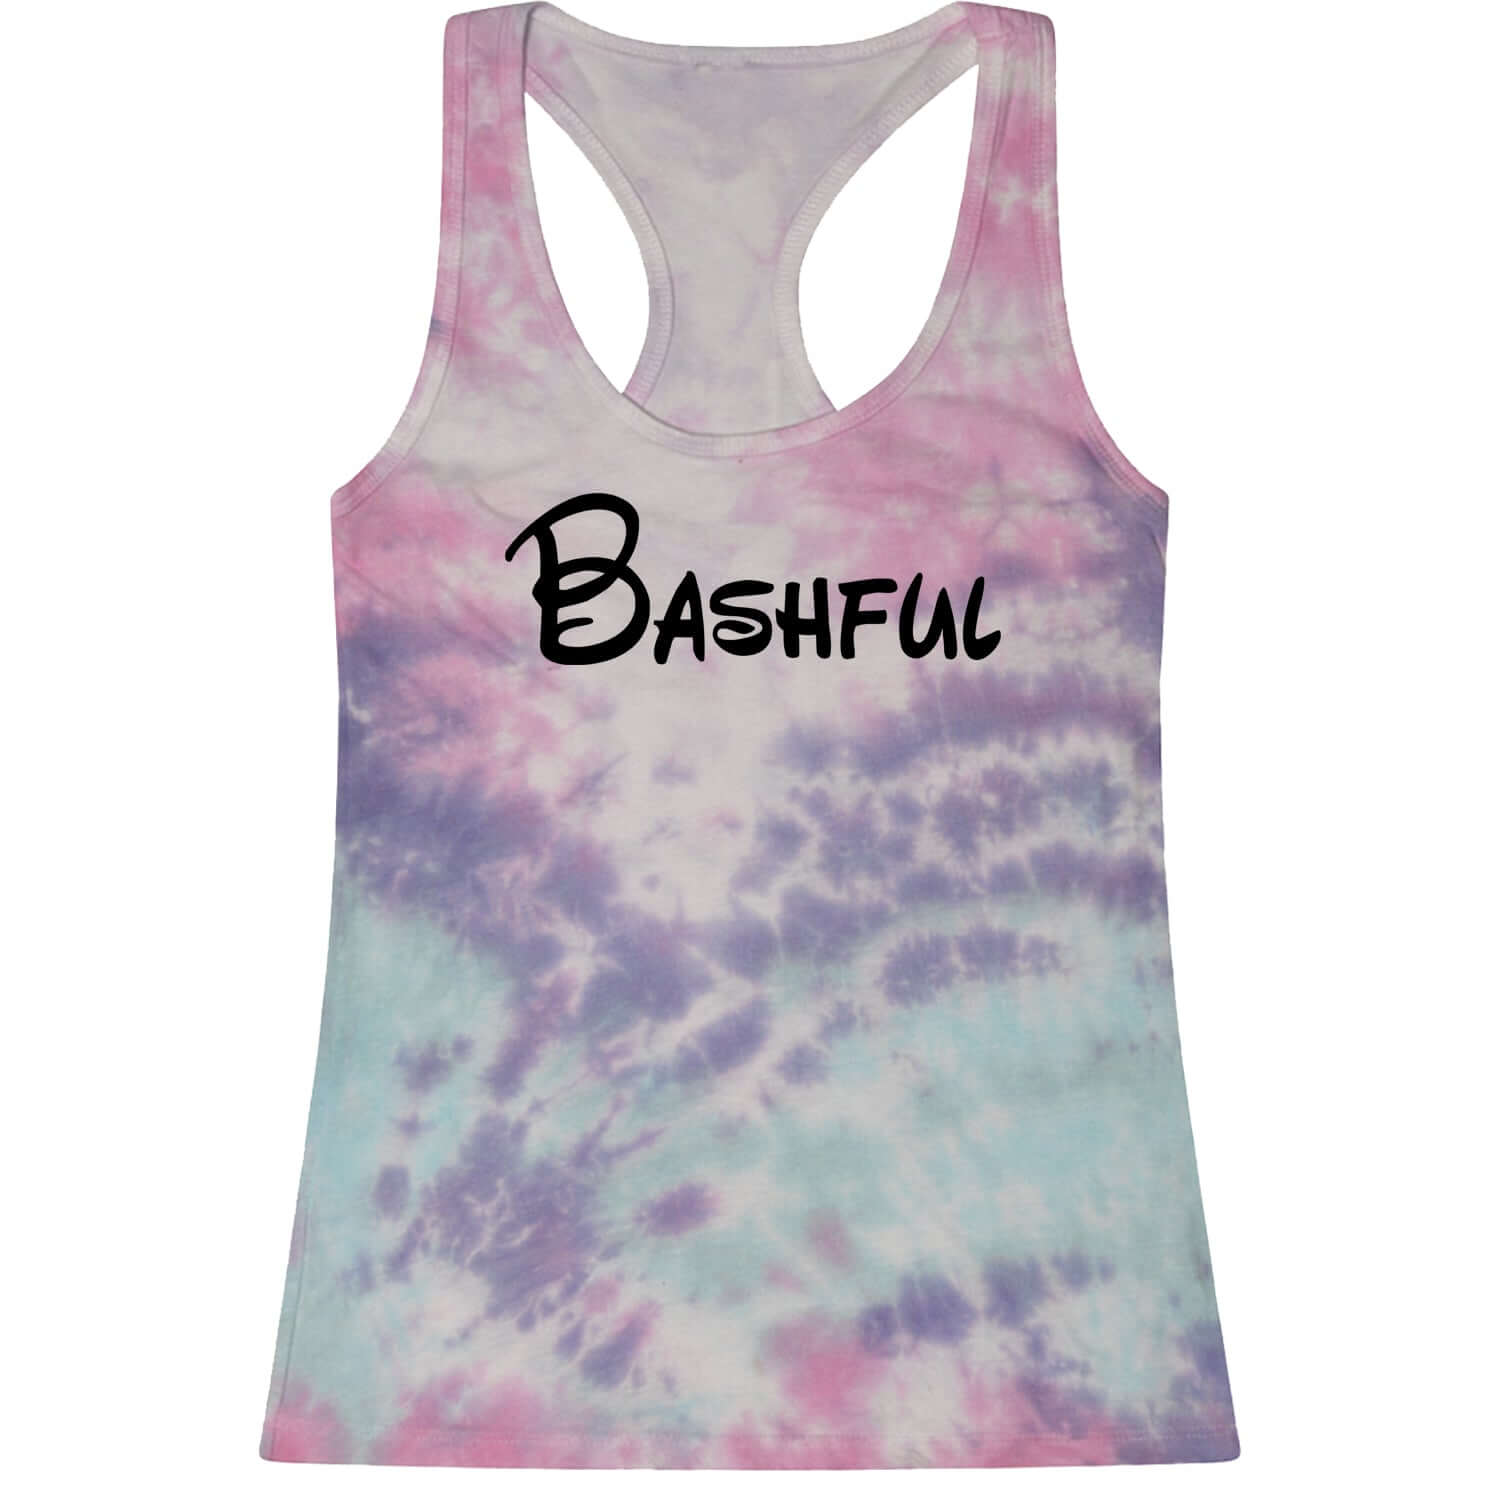 Bashful - 7 Dwarfs Costume Racerback Tank Top for Women and, costume, dwarfs, group, halloween, matching, seven, snow, the, white by Expression Tees